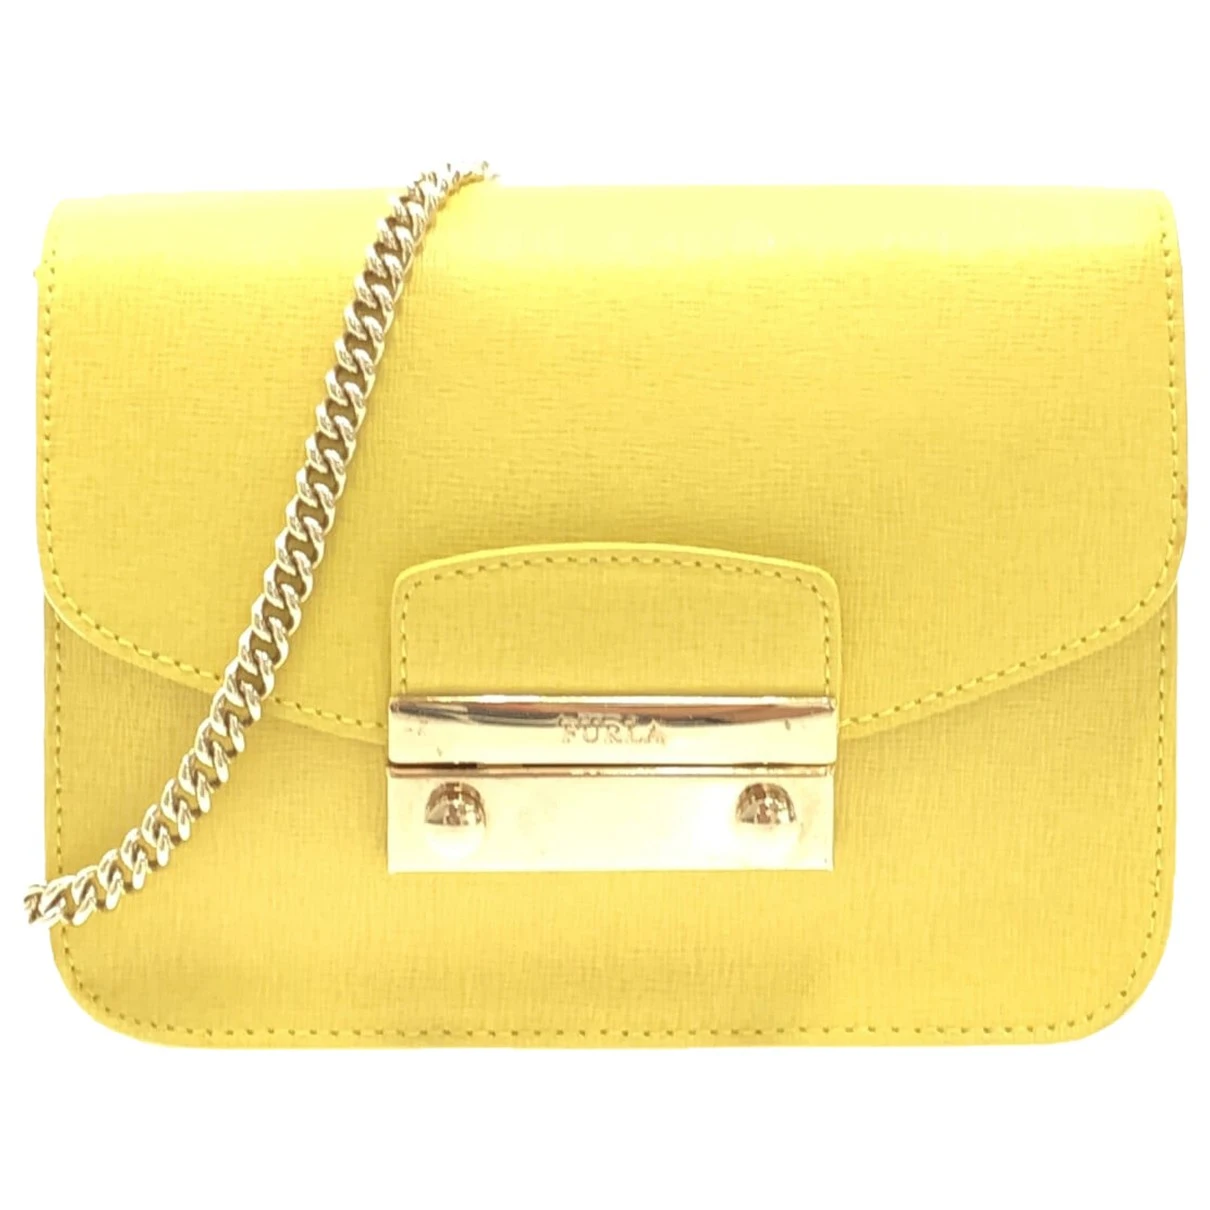 Pre-owned Furla Leather Handbag In Yellow